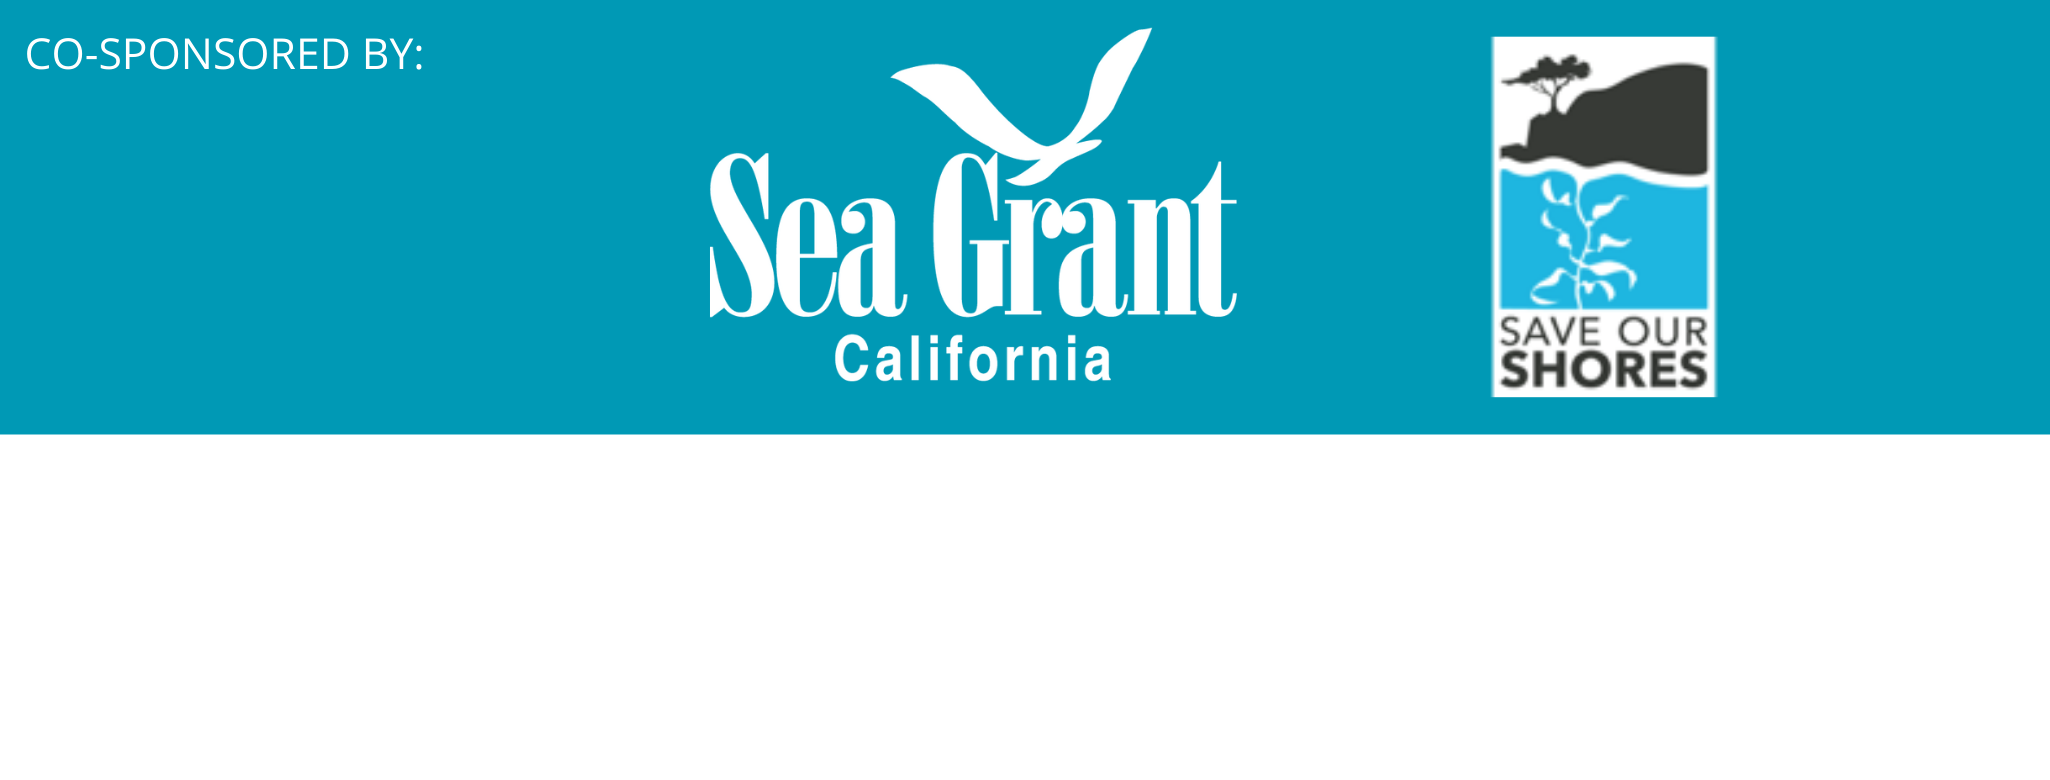 Cosponsored by: california sea grant, save our shores